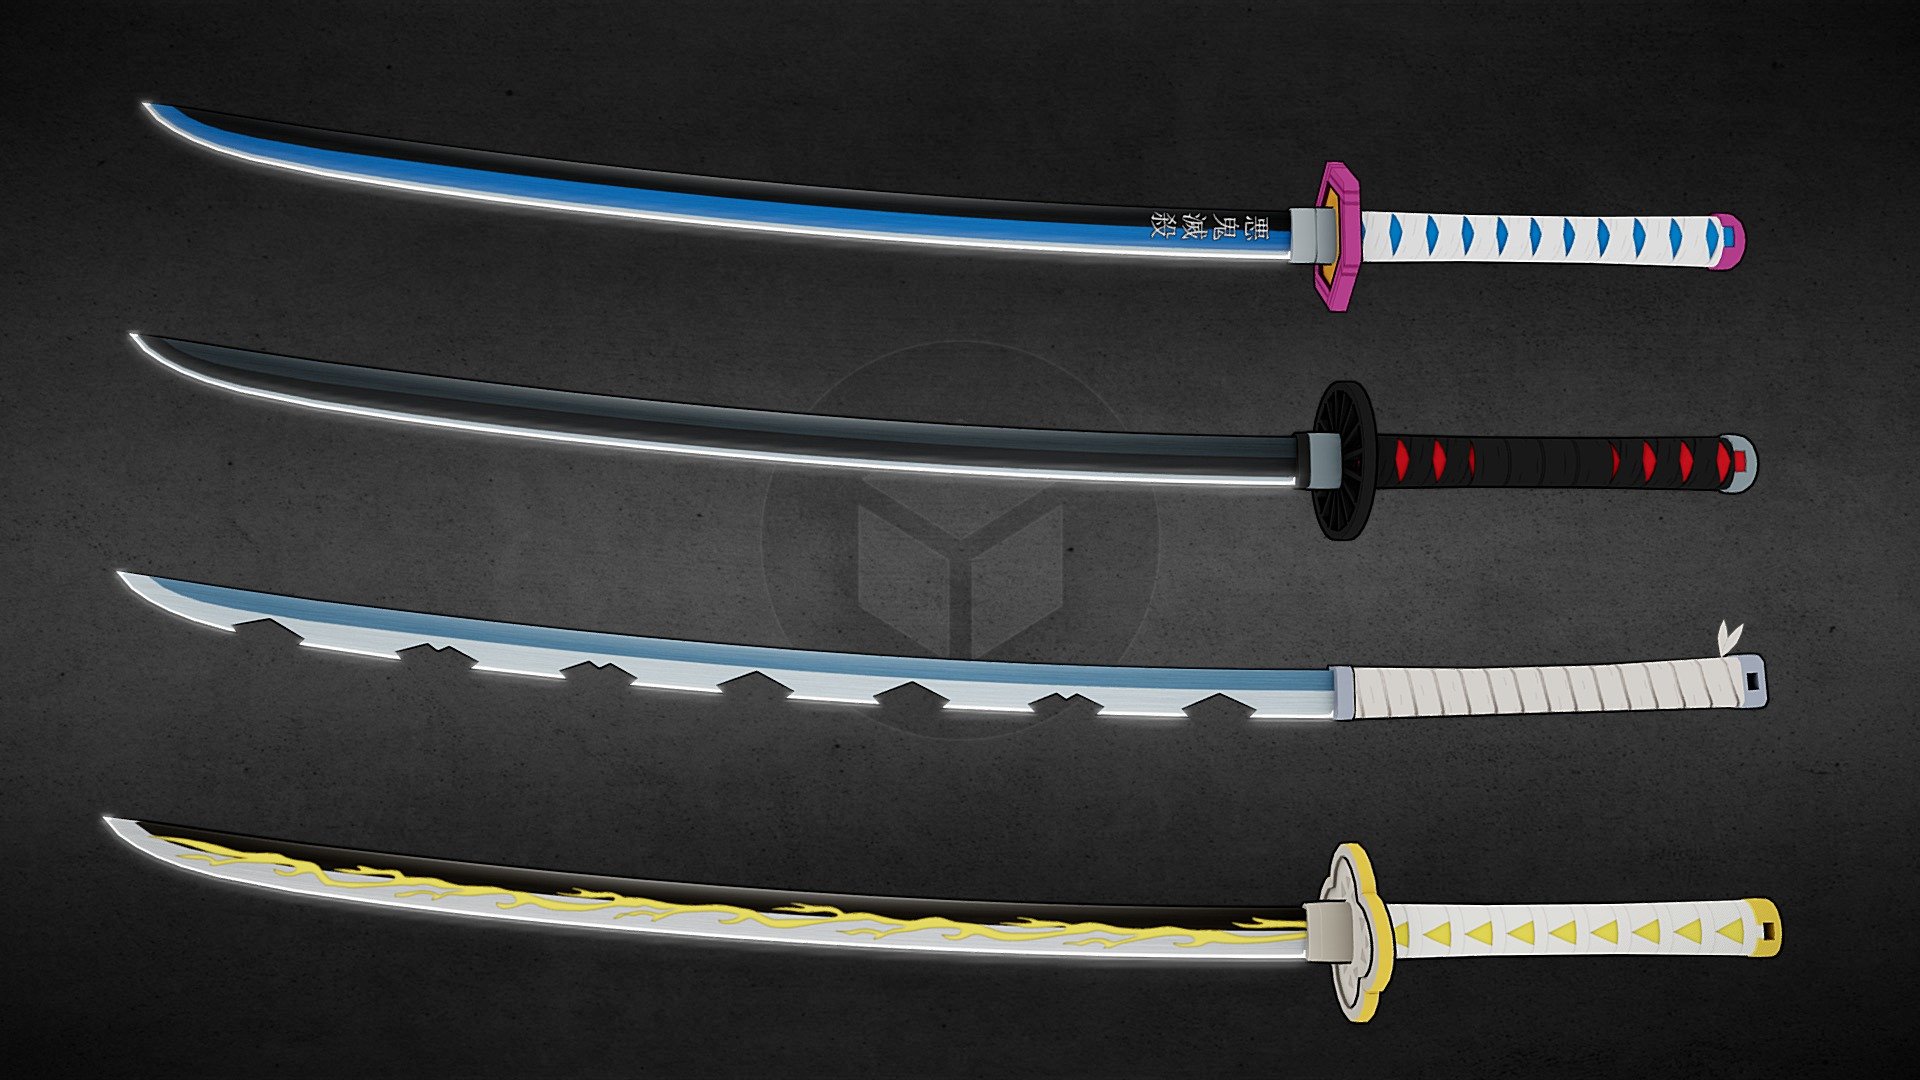 A collection of katanas from the Anime: &lsquo;Demon Slayer: Kimetsu no Yaiba'.
The katanas shown belong to the following characters (from top to bottom):
-Tomioka Giyu
-Tanjiro Kamado
-Inosuke Hashibira
-Zenitsu Agatsuma

Models were made using Blender.
For the texture, I used Photoshop. I also baked AO maps in Substance Painter which were then used in the texture.

(None of the UVs overlap to allow baking) - Demon Slayer: Katana Collection - 3D model by DennisVanMalderen 3d model